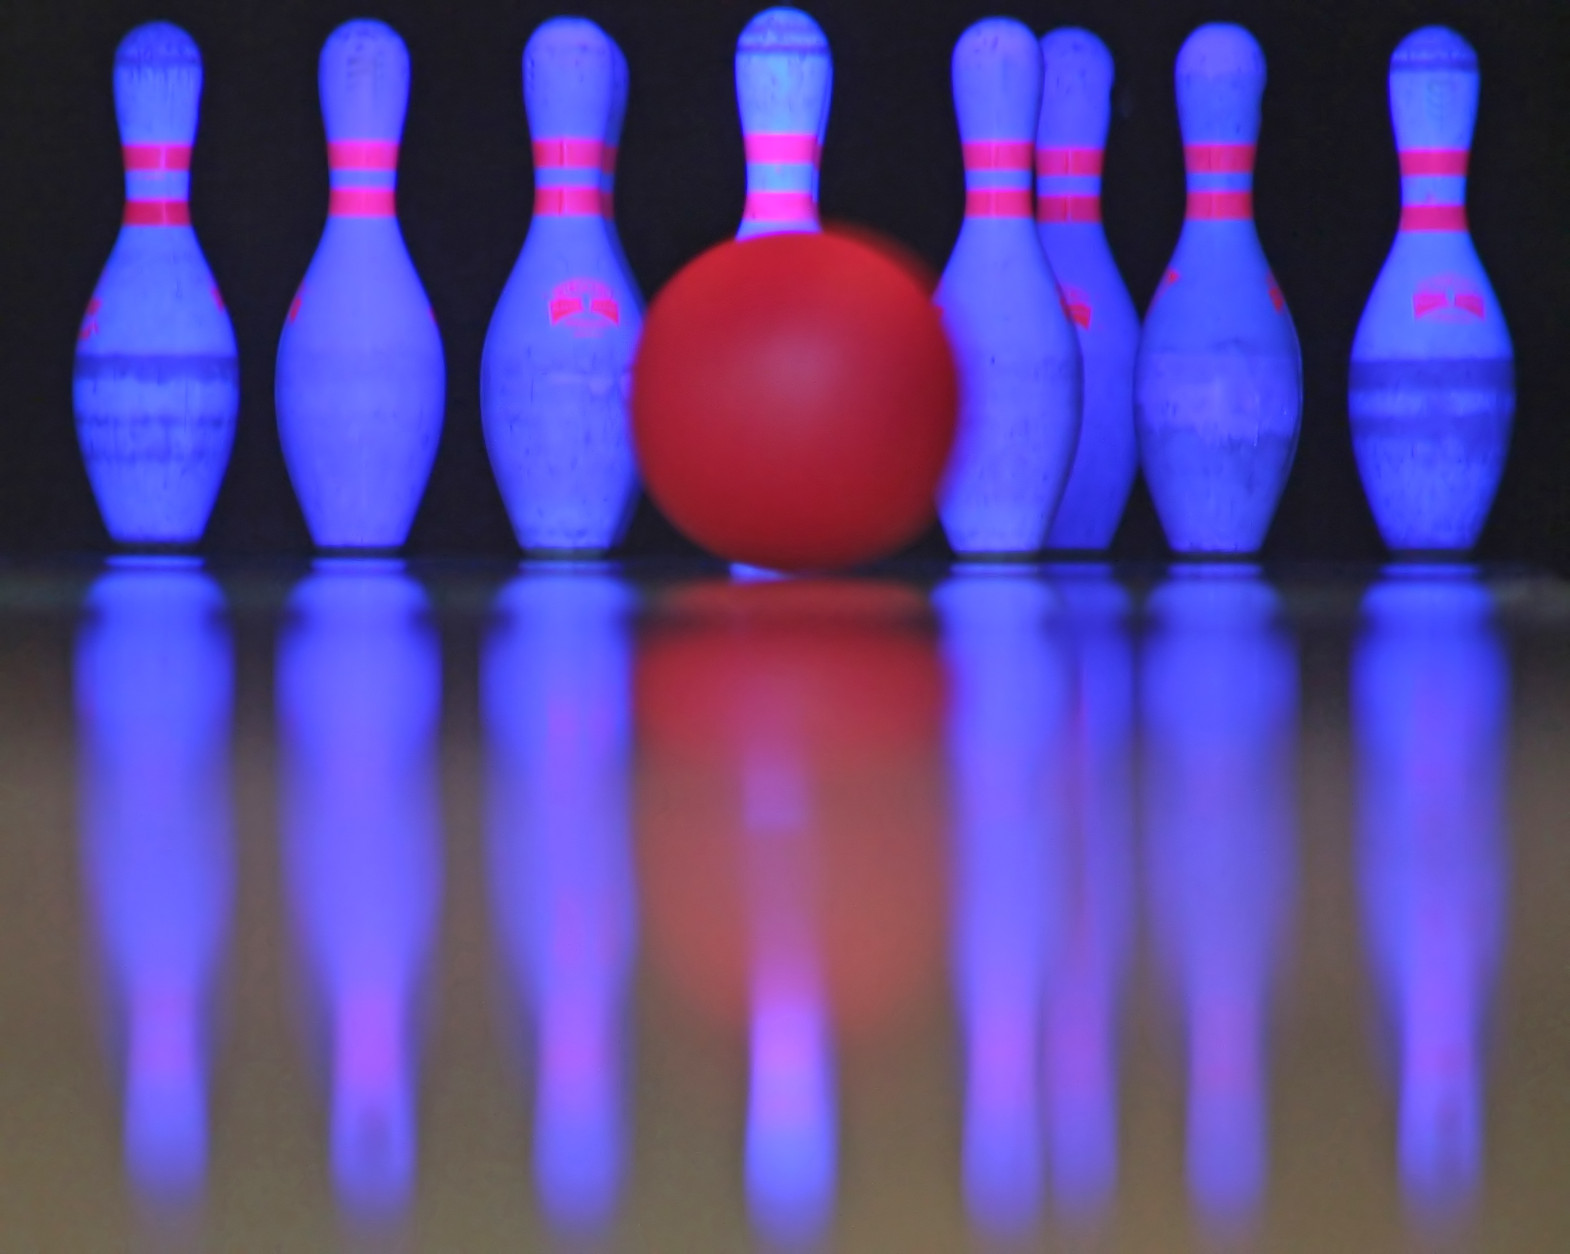 A bowling ball just about to hit the pins.